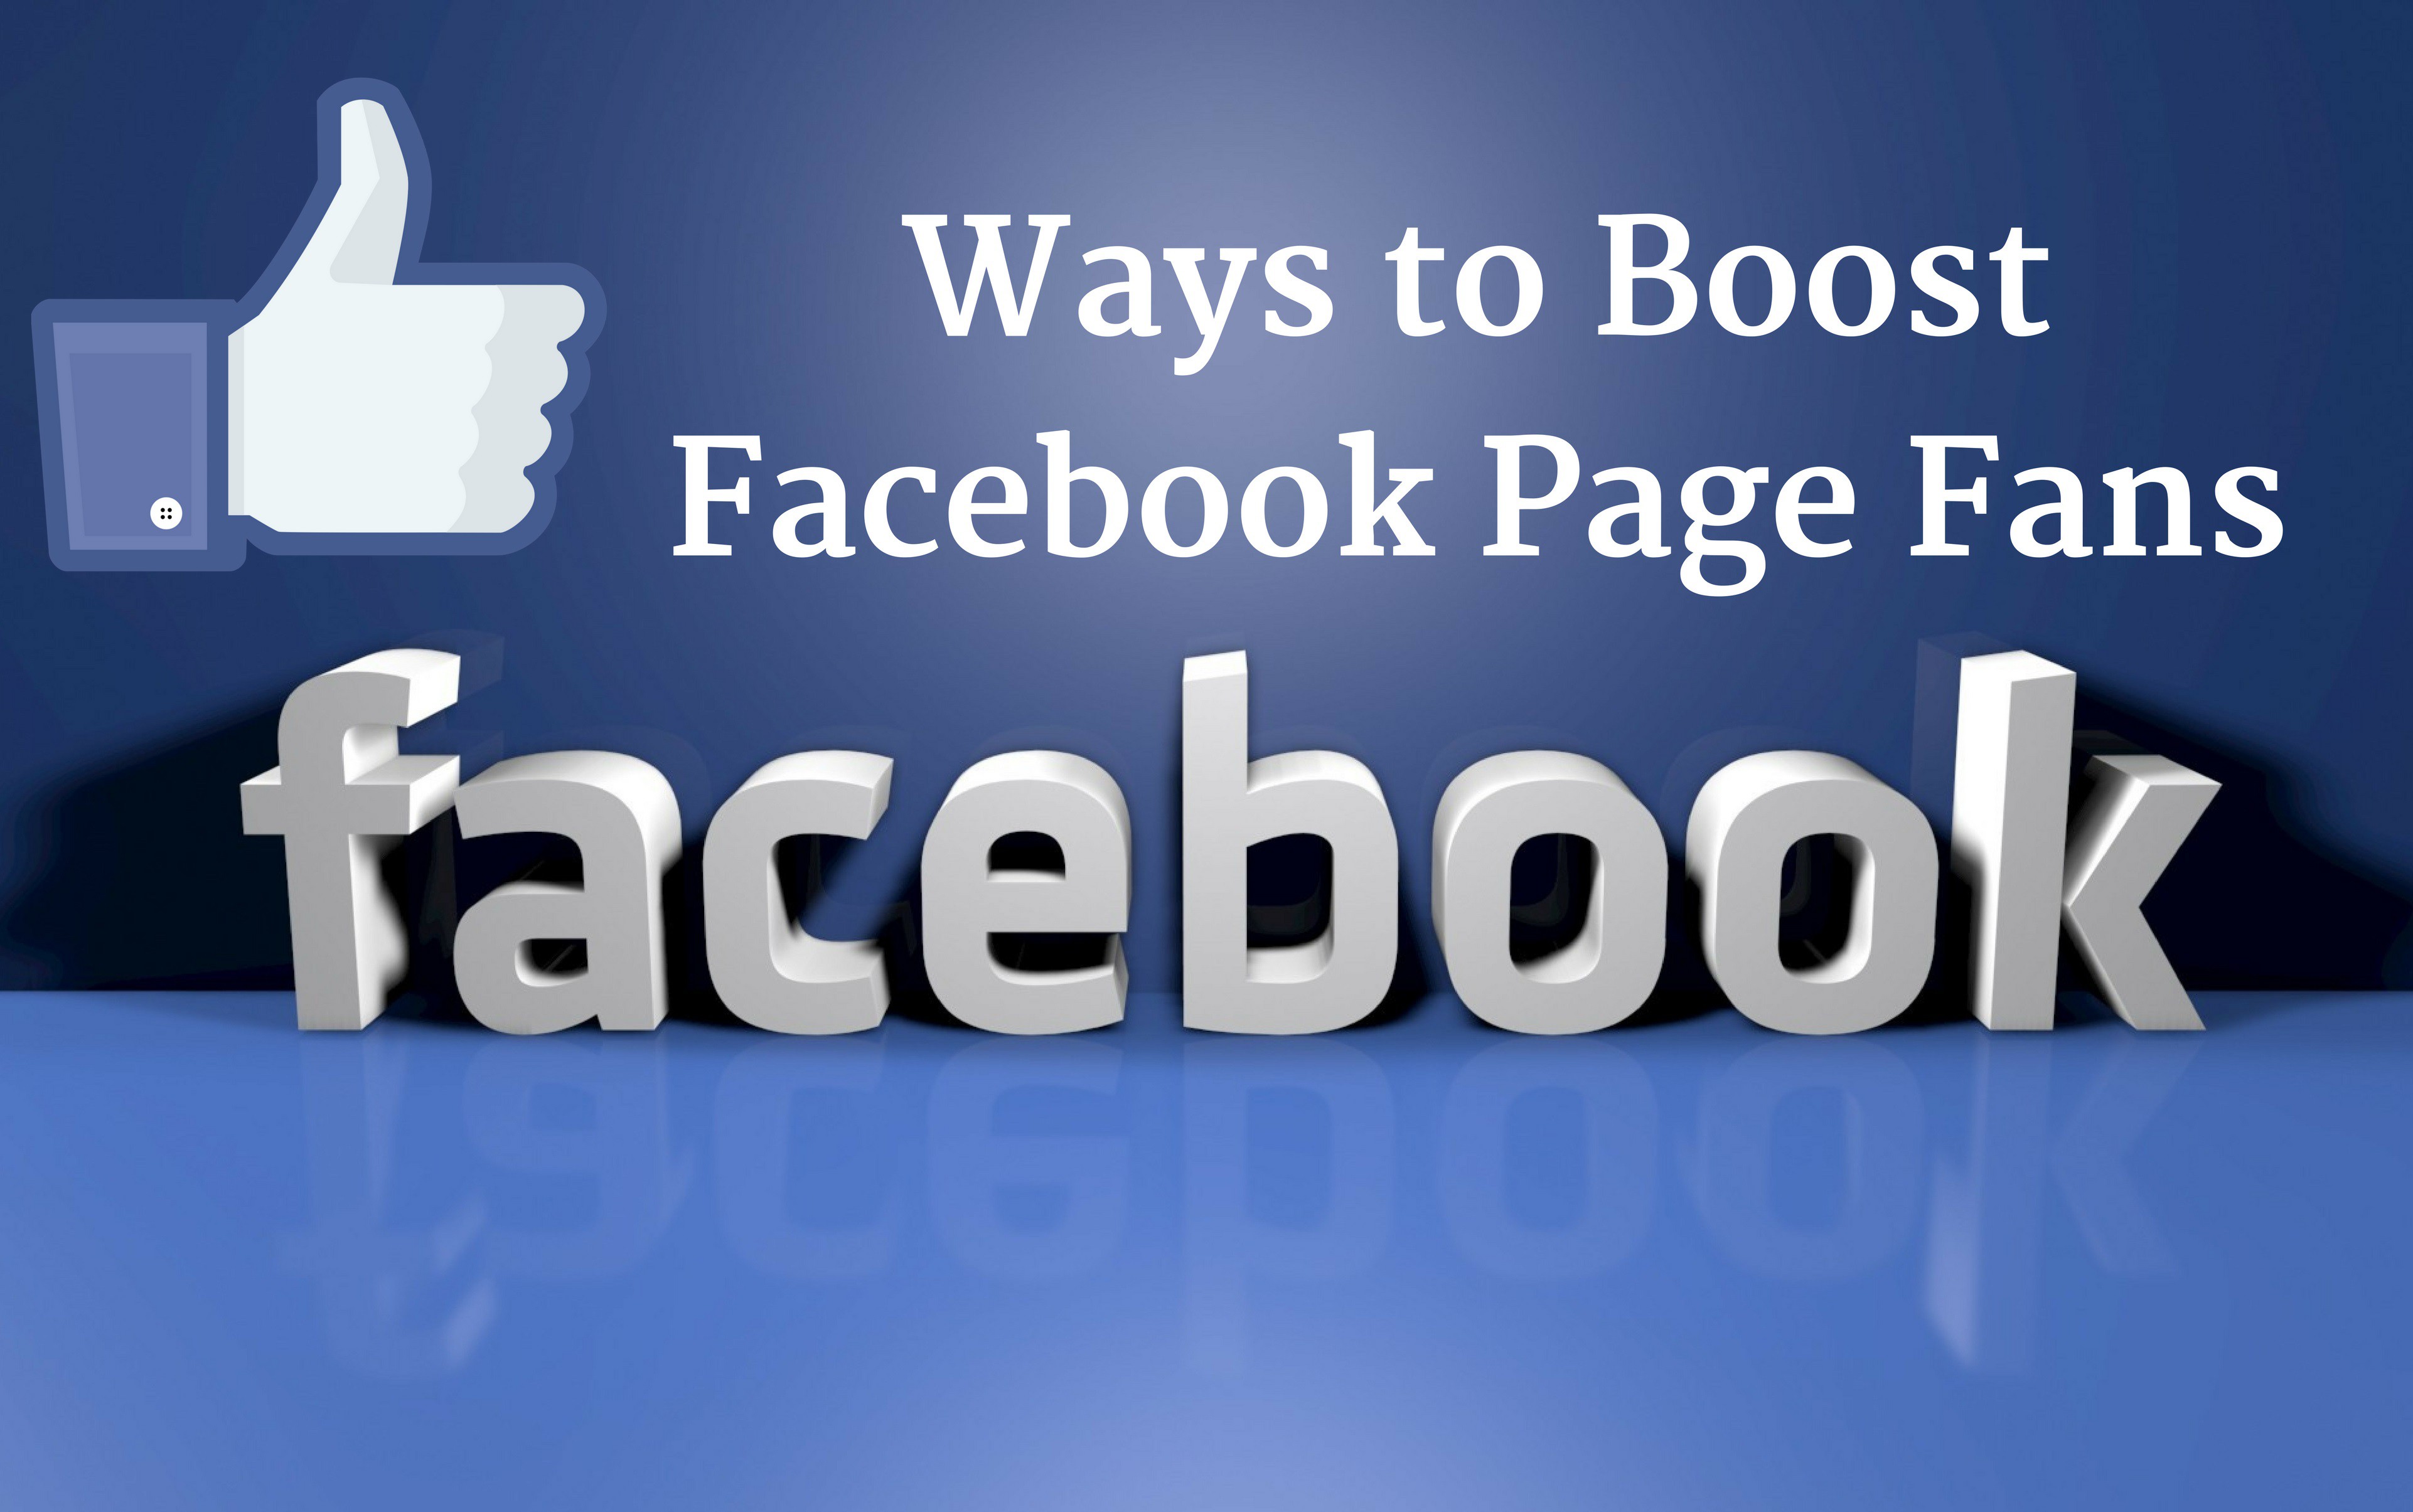 What Are the 12 Most Effective Ways to Boost Your Facebook Page Fans?